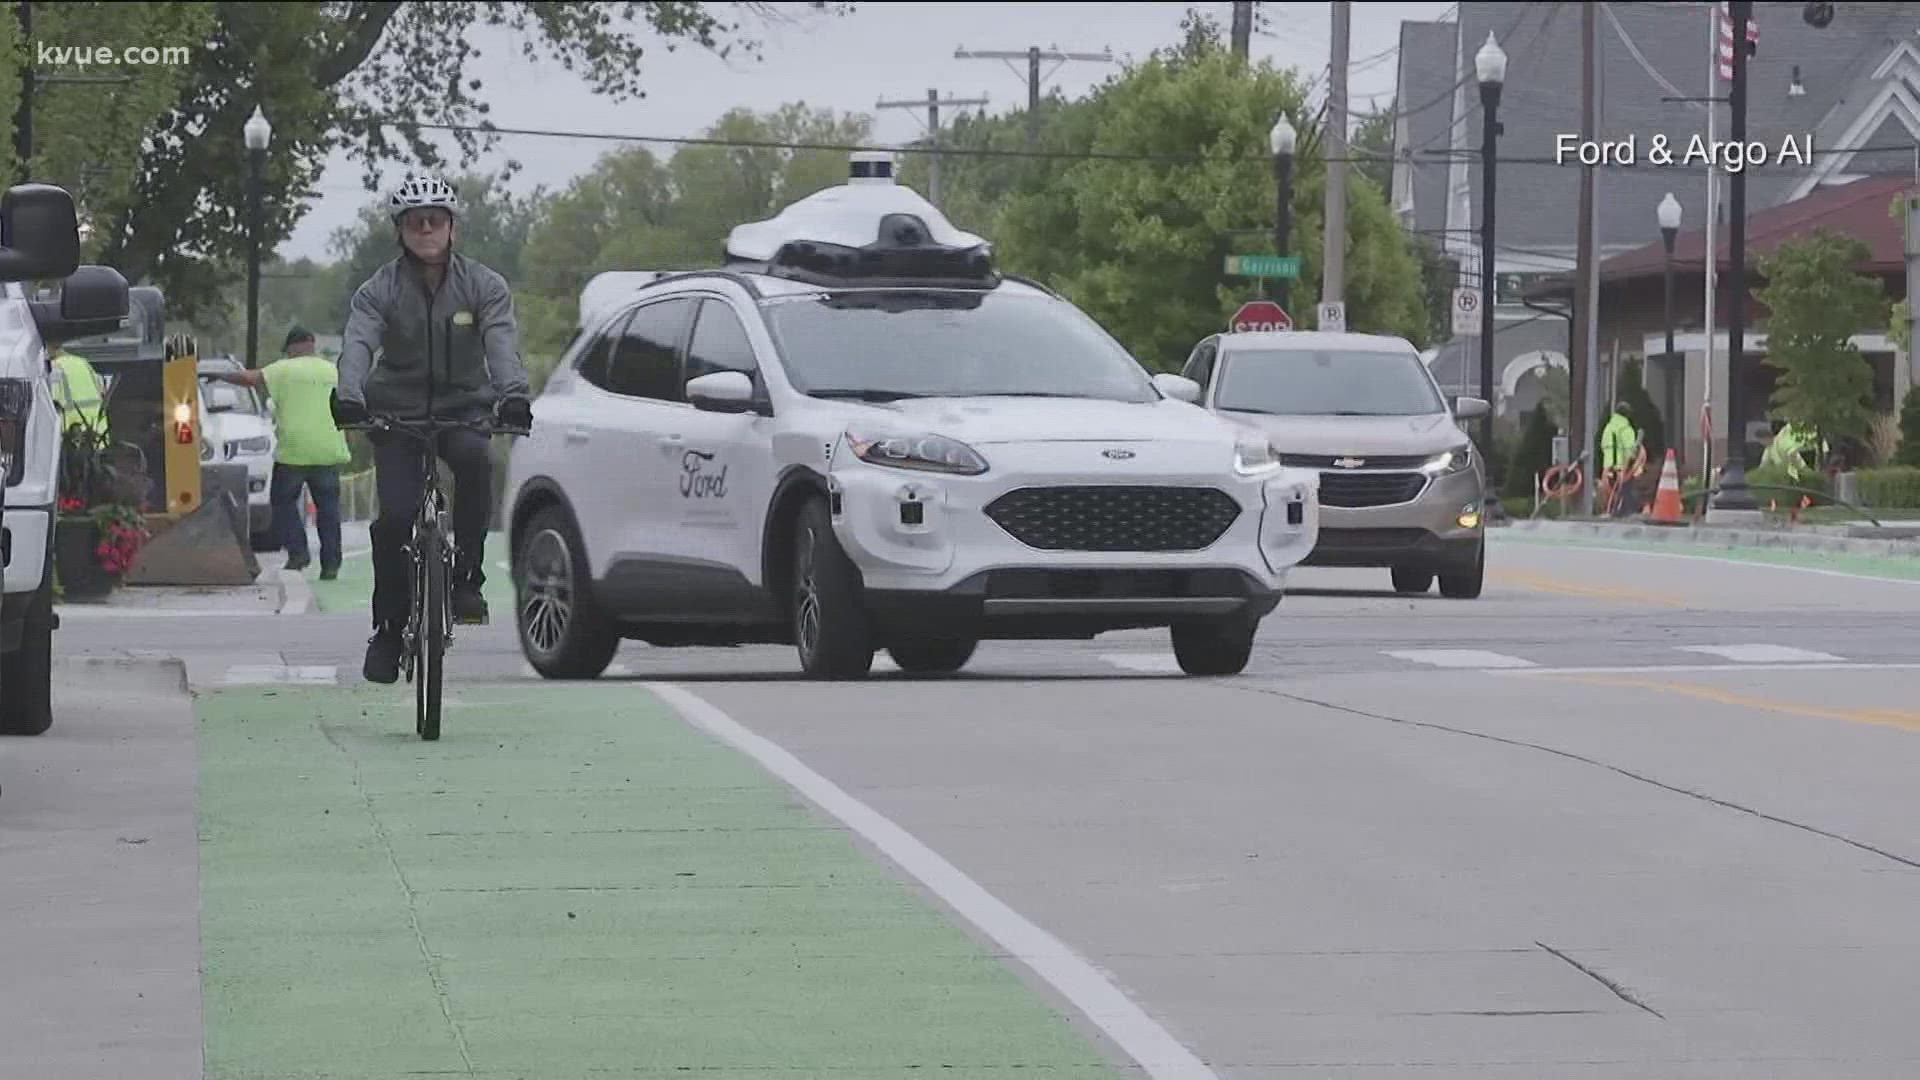 Ford teamed up Argo AI and Lyft to deploy autonomous cars in the streets of Austin.